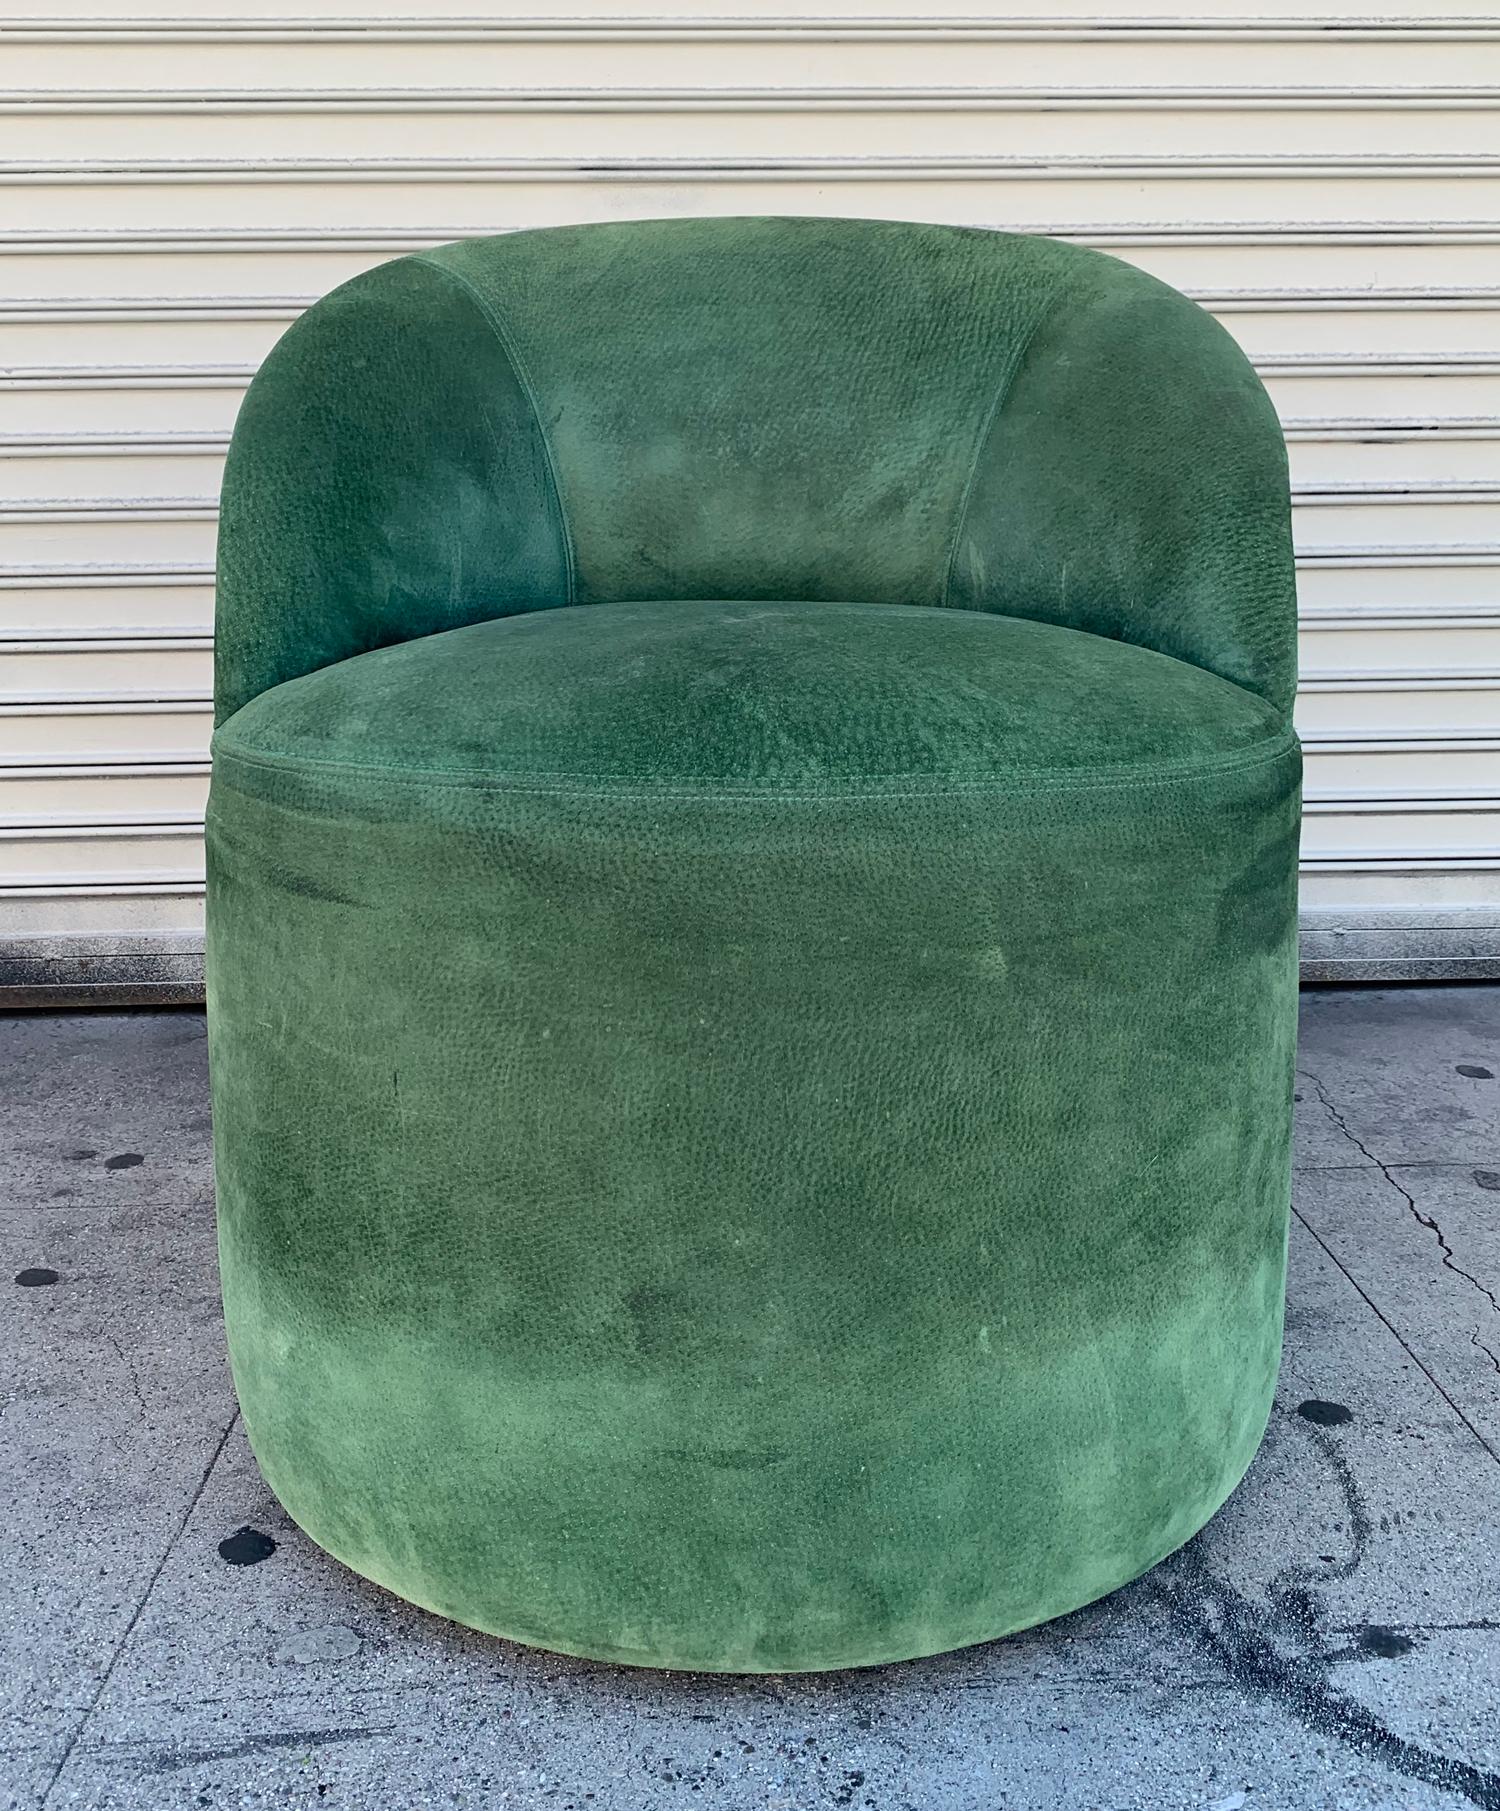 The chair is in good condition however it shows wear and either needs to be professionally cleaned or reupholstered, the suede has no holes or tears but it does have some soiled areas and marks.
The chair has casters and is easy to move around or